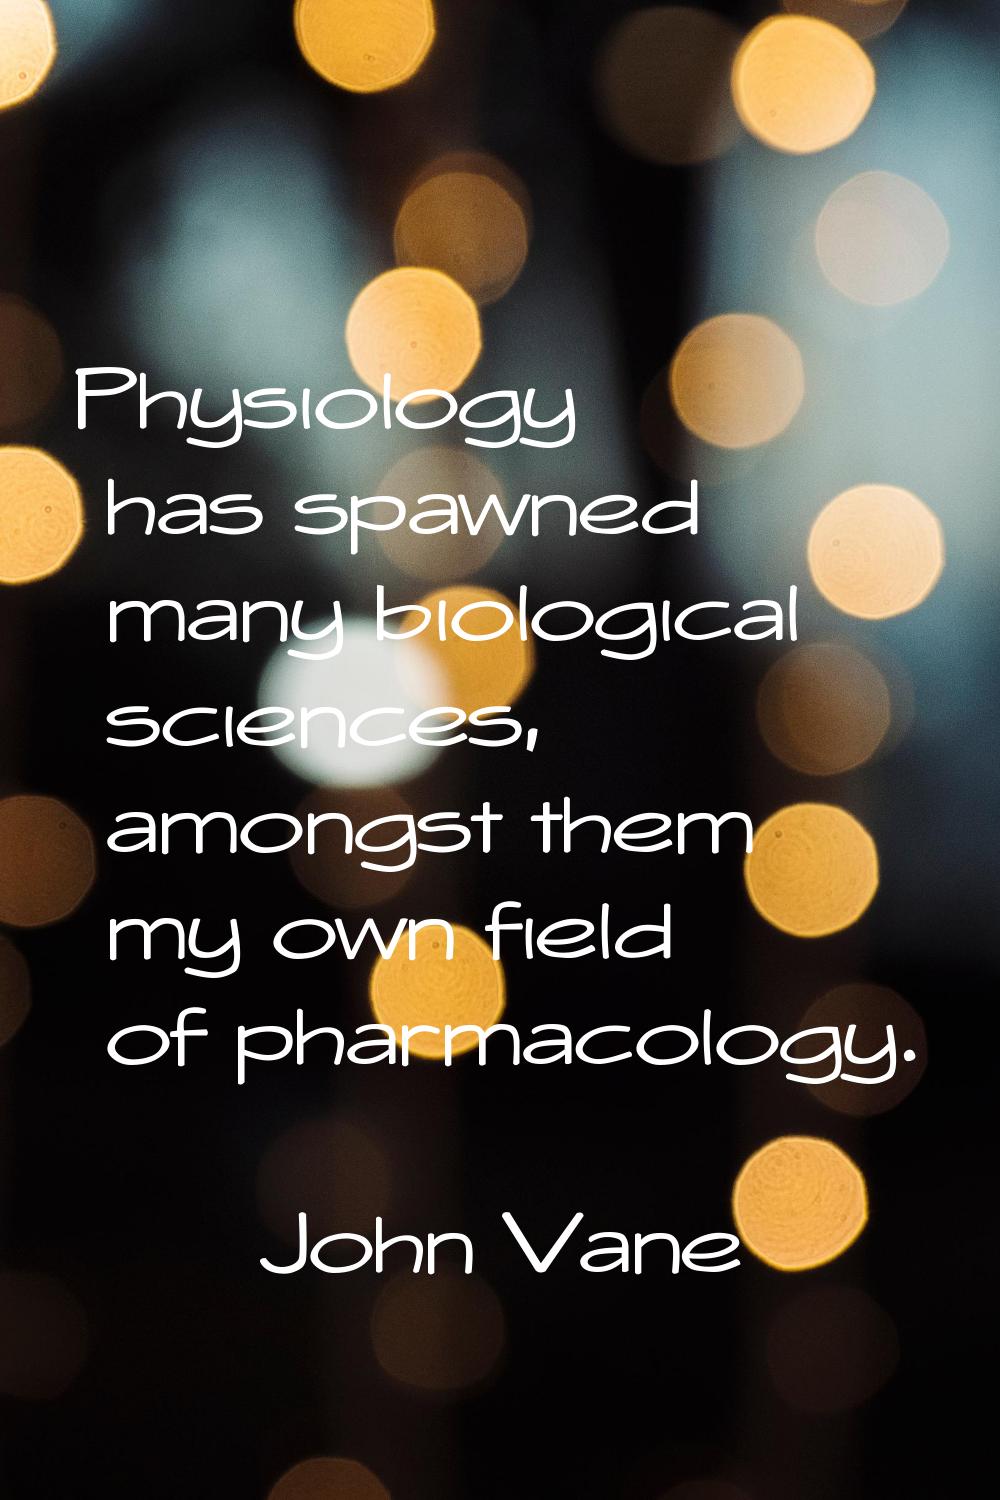 Physiology has spawned many biological sciences, amongst them my own field of pharmacology.